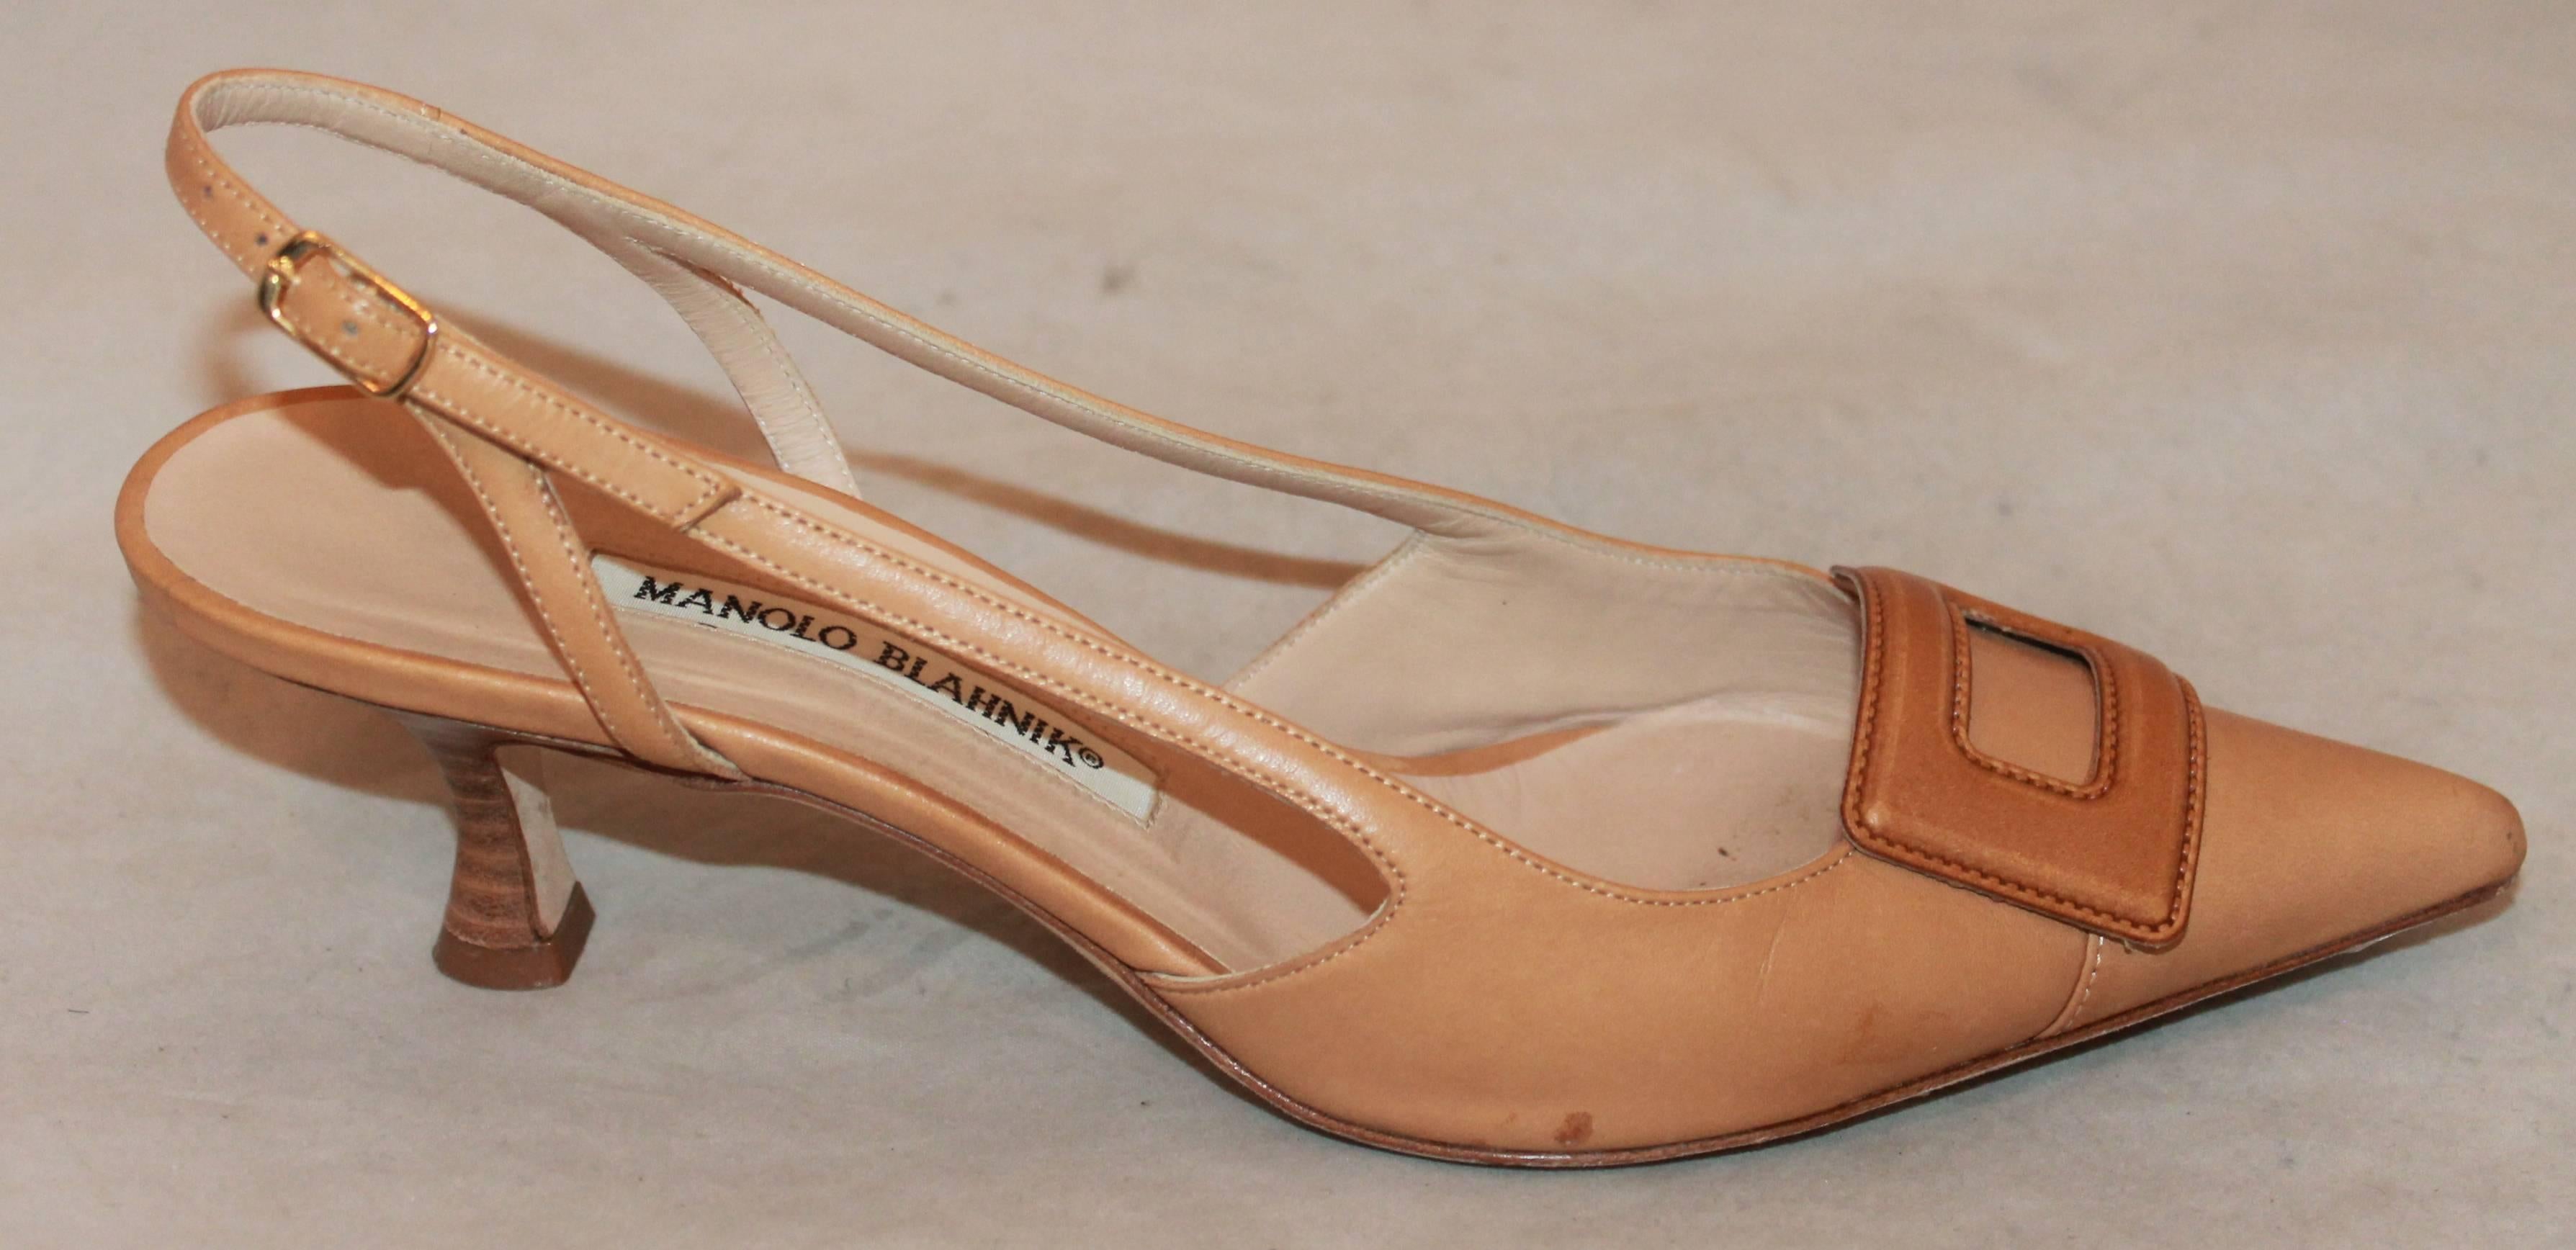 Manolo Blahnik Luggage Leather Kitten Heel Pointed Toe Slingbacks - 7B.  These shoes are in good condition with only a small spot on the right shoe.  They feature a lovely luggage leather, kitten heels, pointed toes, straps with buckles on the